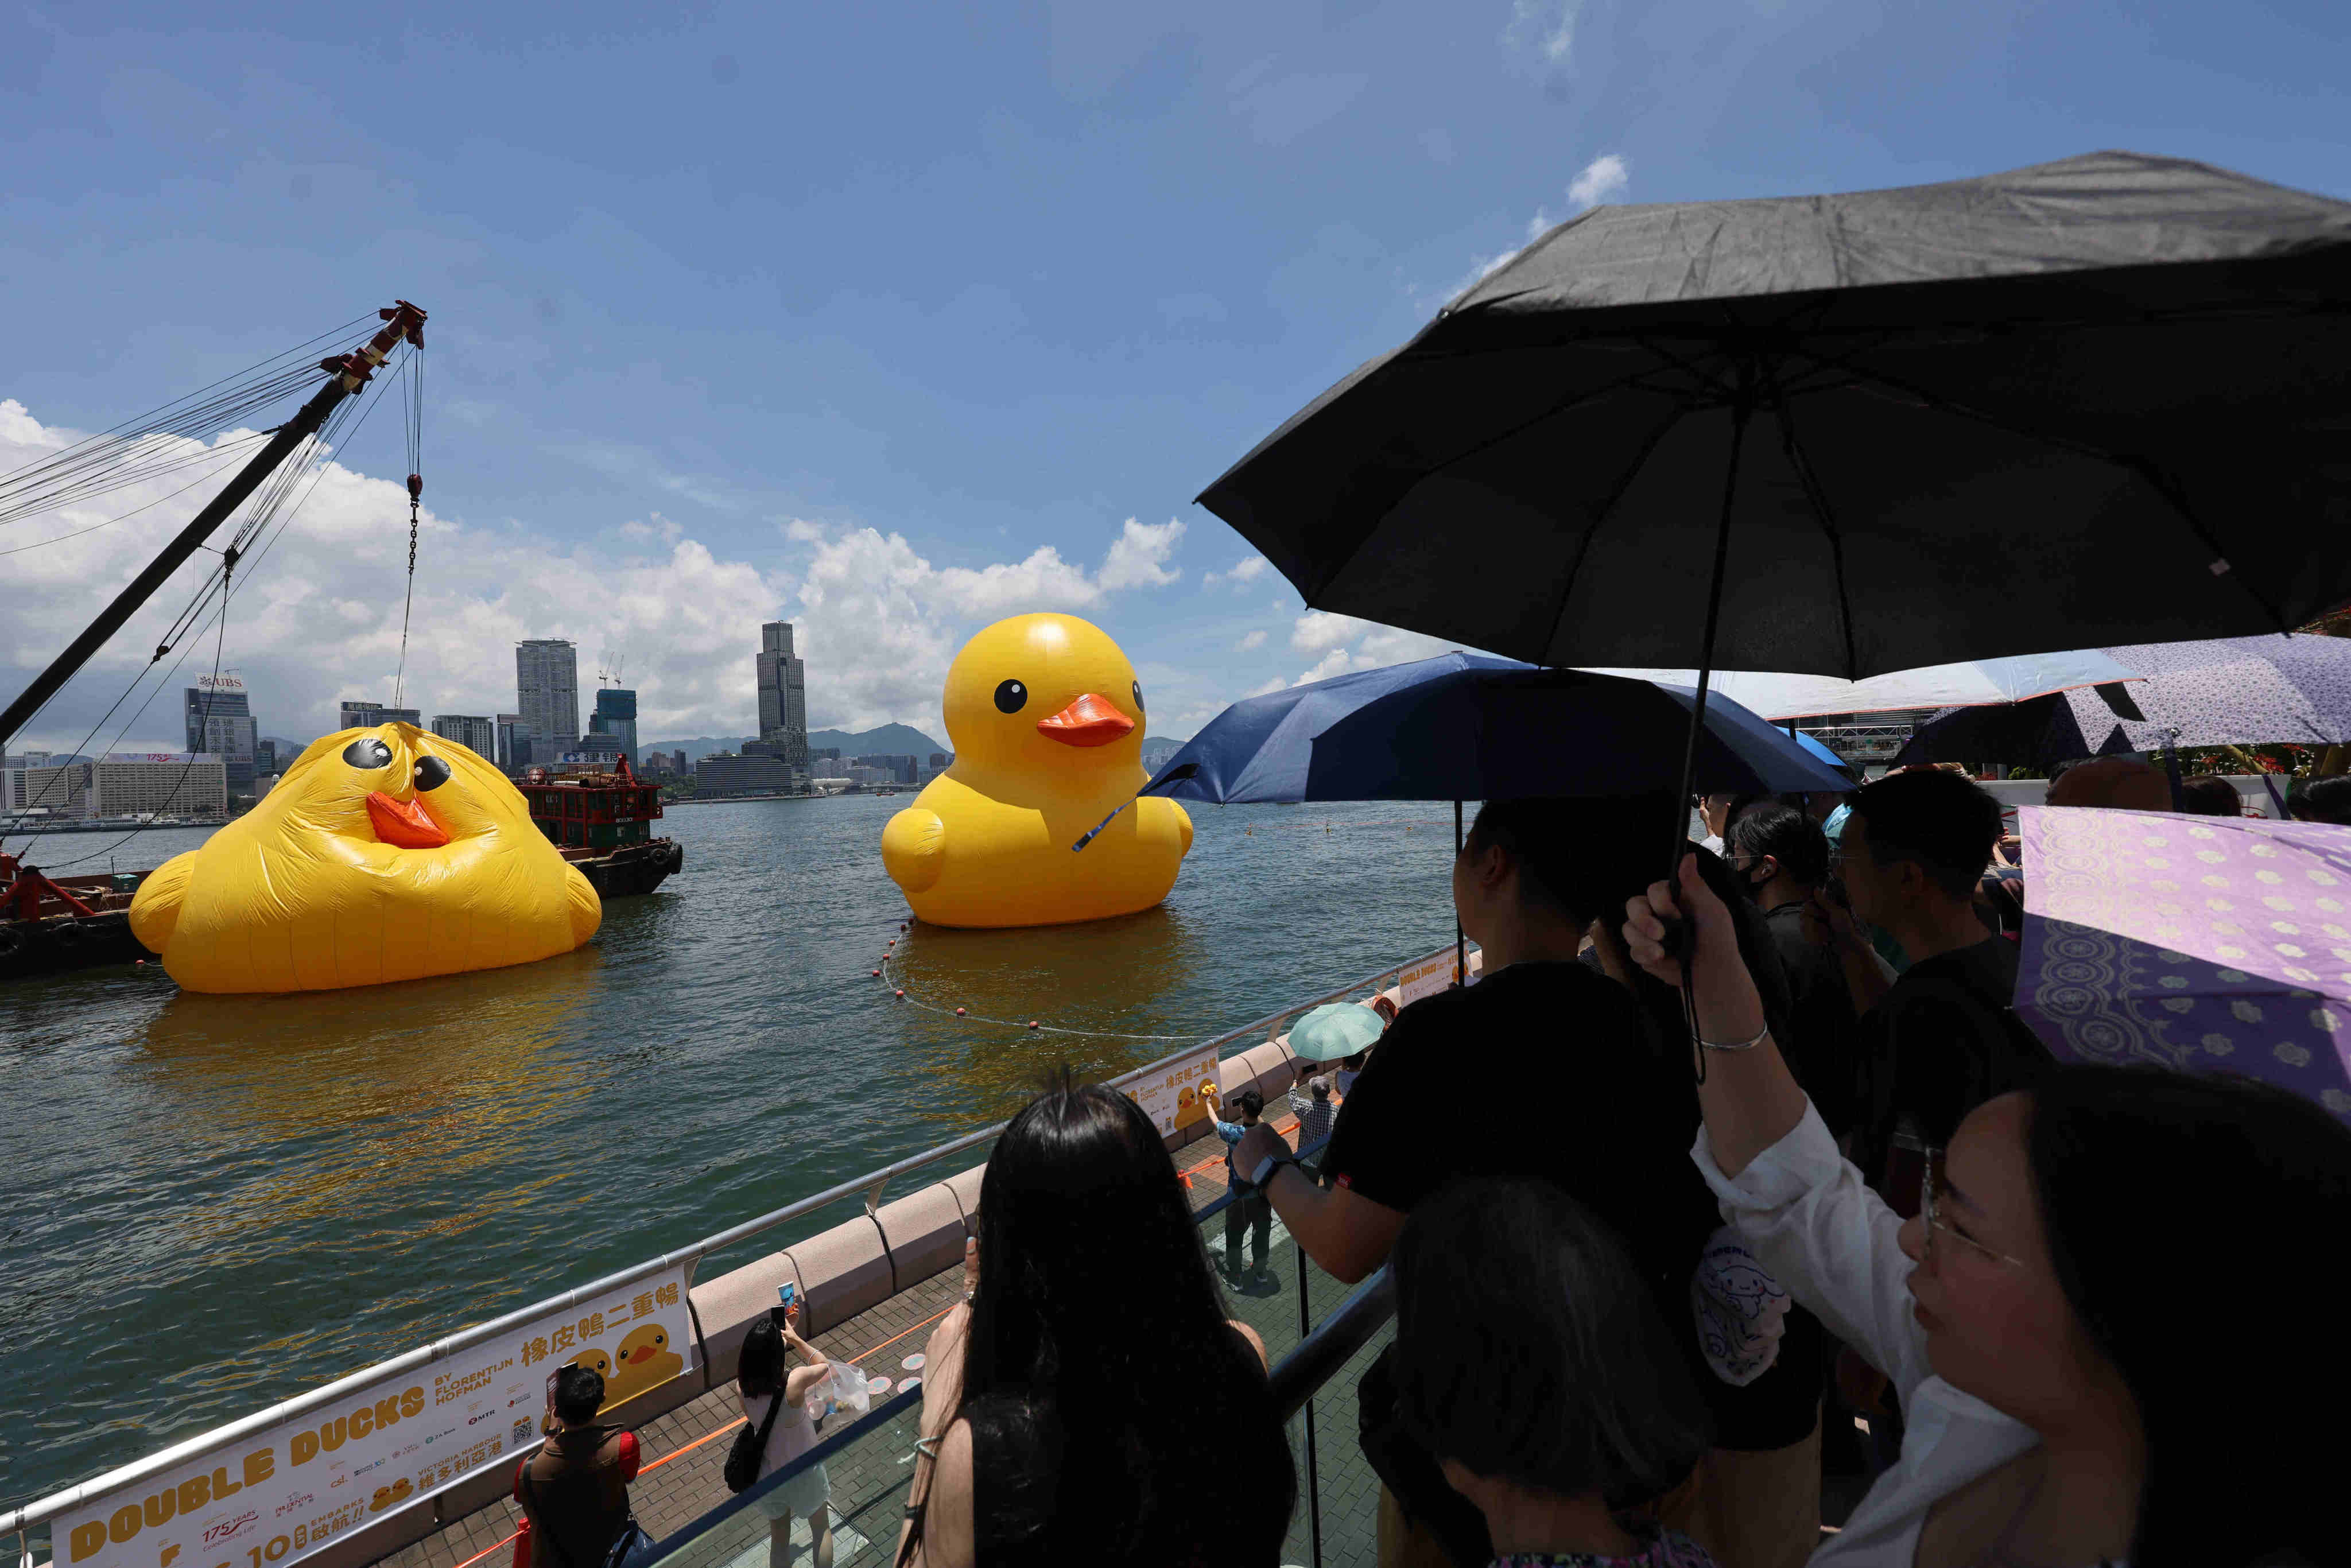 The giant rubber duck was reunited with its twin after checks and repairs. Photo: May Tse